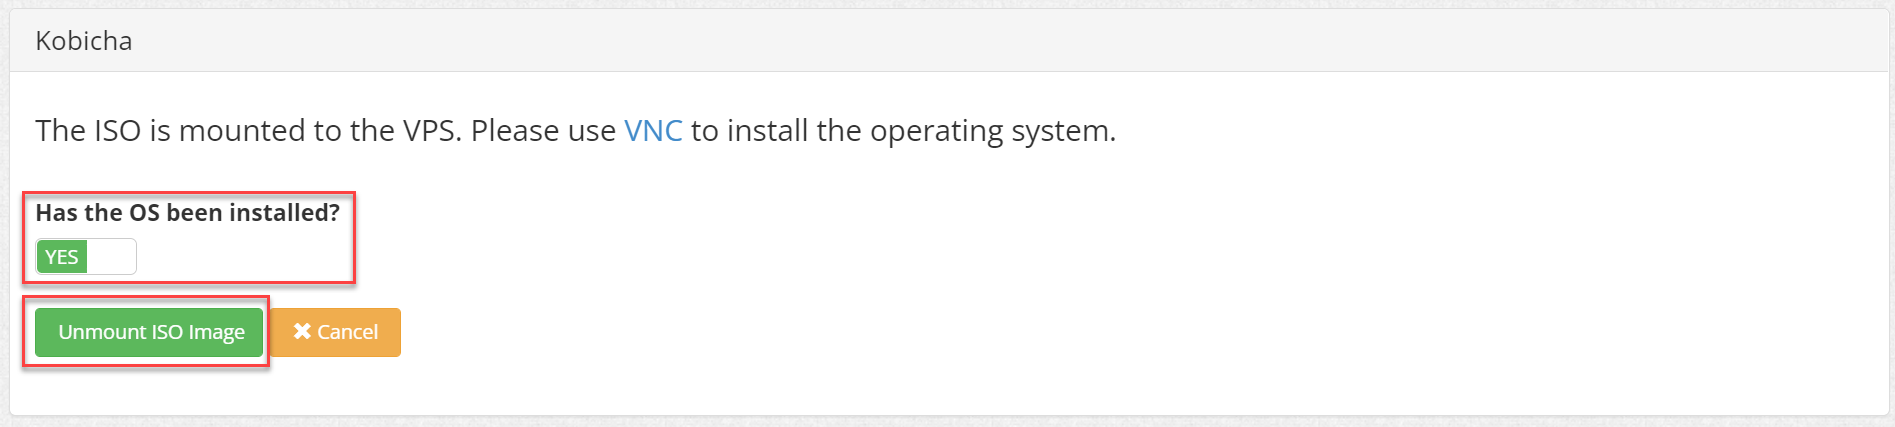 Unmount the ISO after installing the operating system